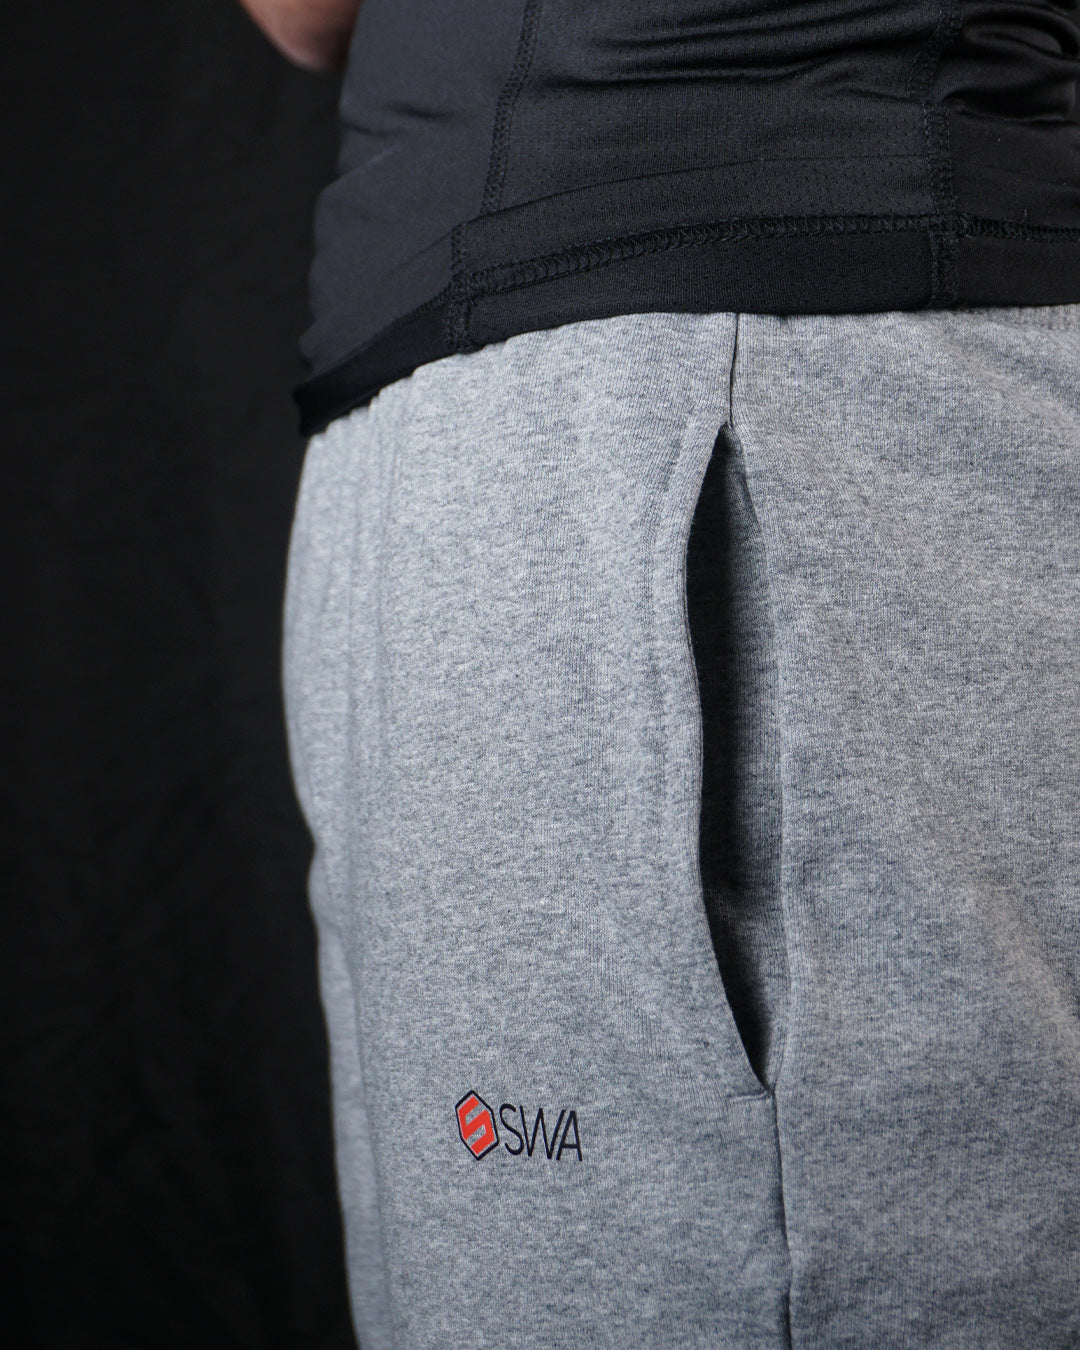 Large Joggers - Gray